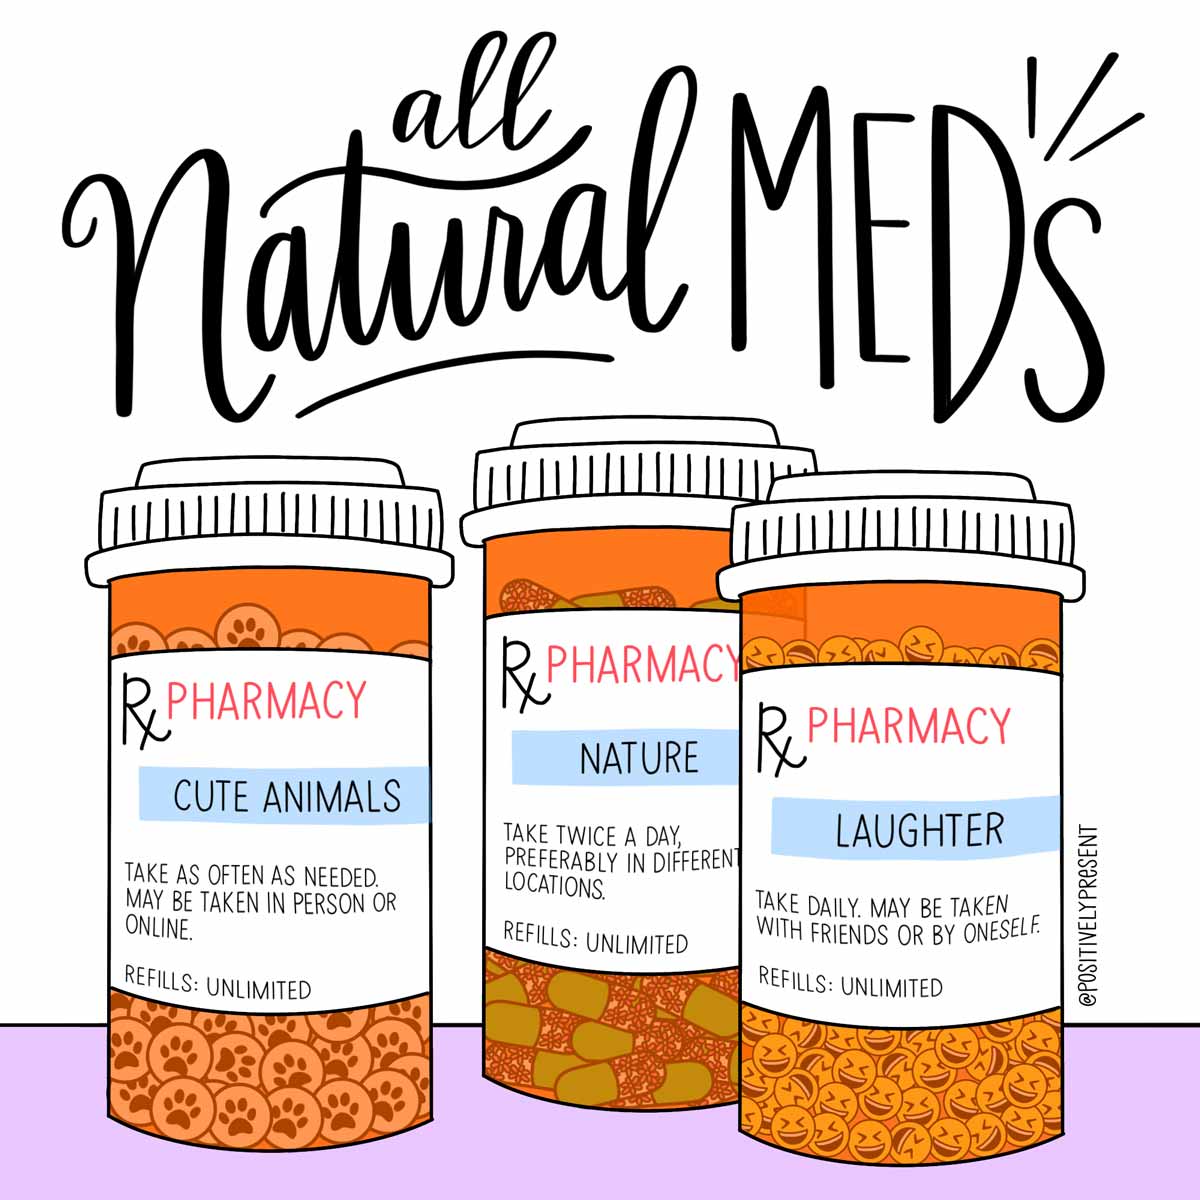 drawing of prescription bottles shows all natural meds to fight anxiety like laughter.